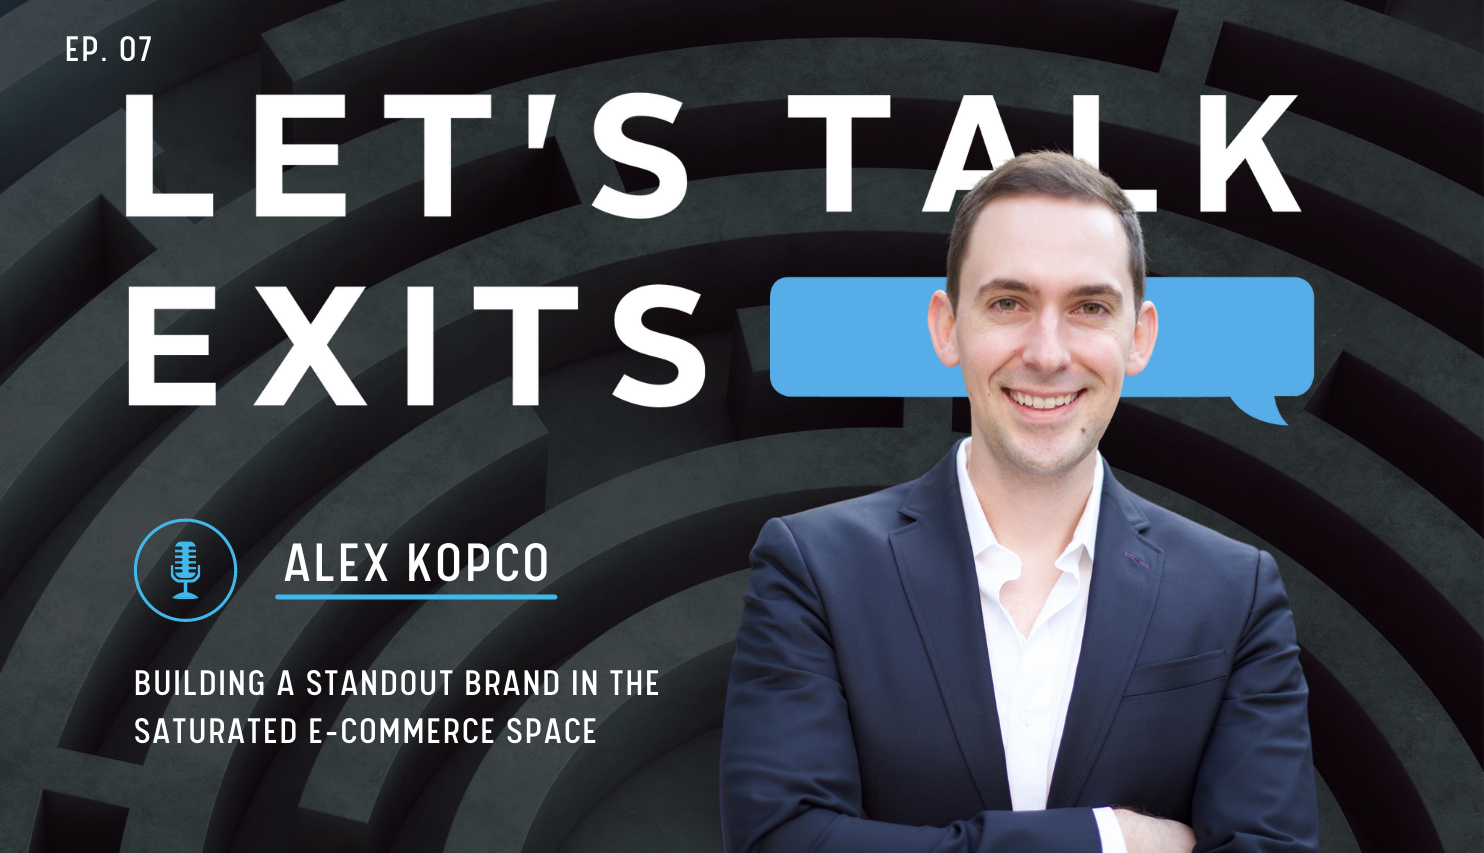 Building a Standout Brand in the Saturated e-Commerce Space with Alex Kopco